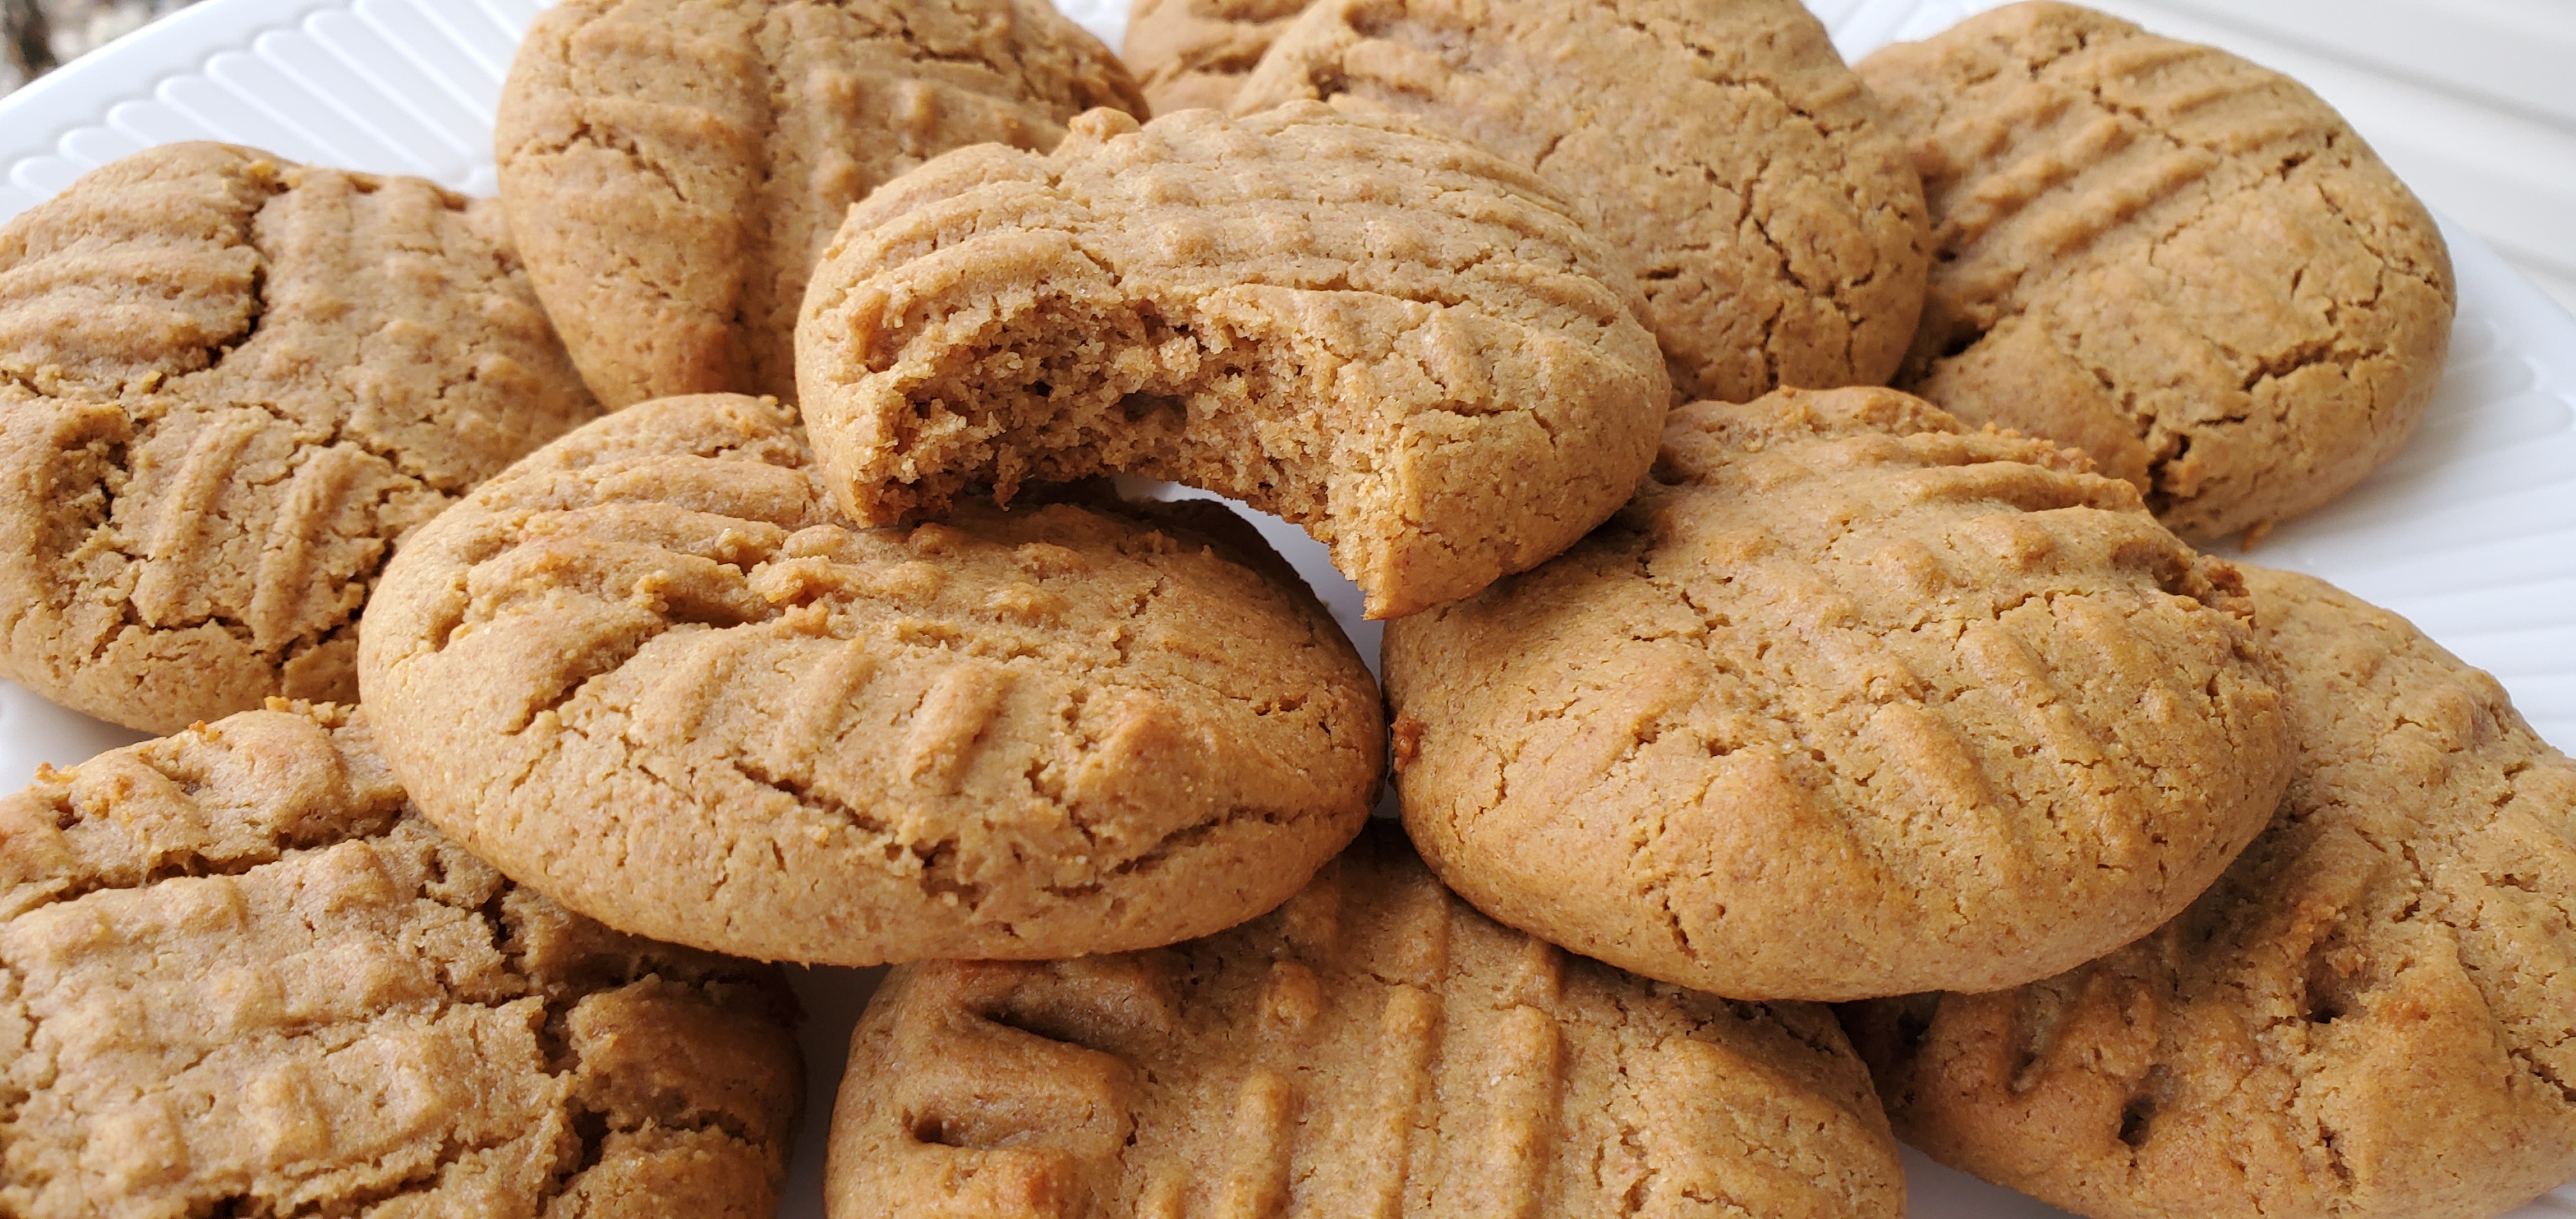 Honey Whole Wheat Peanut Butter Cookies